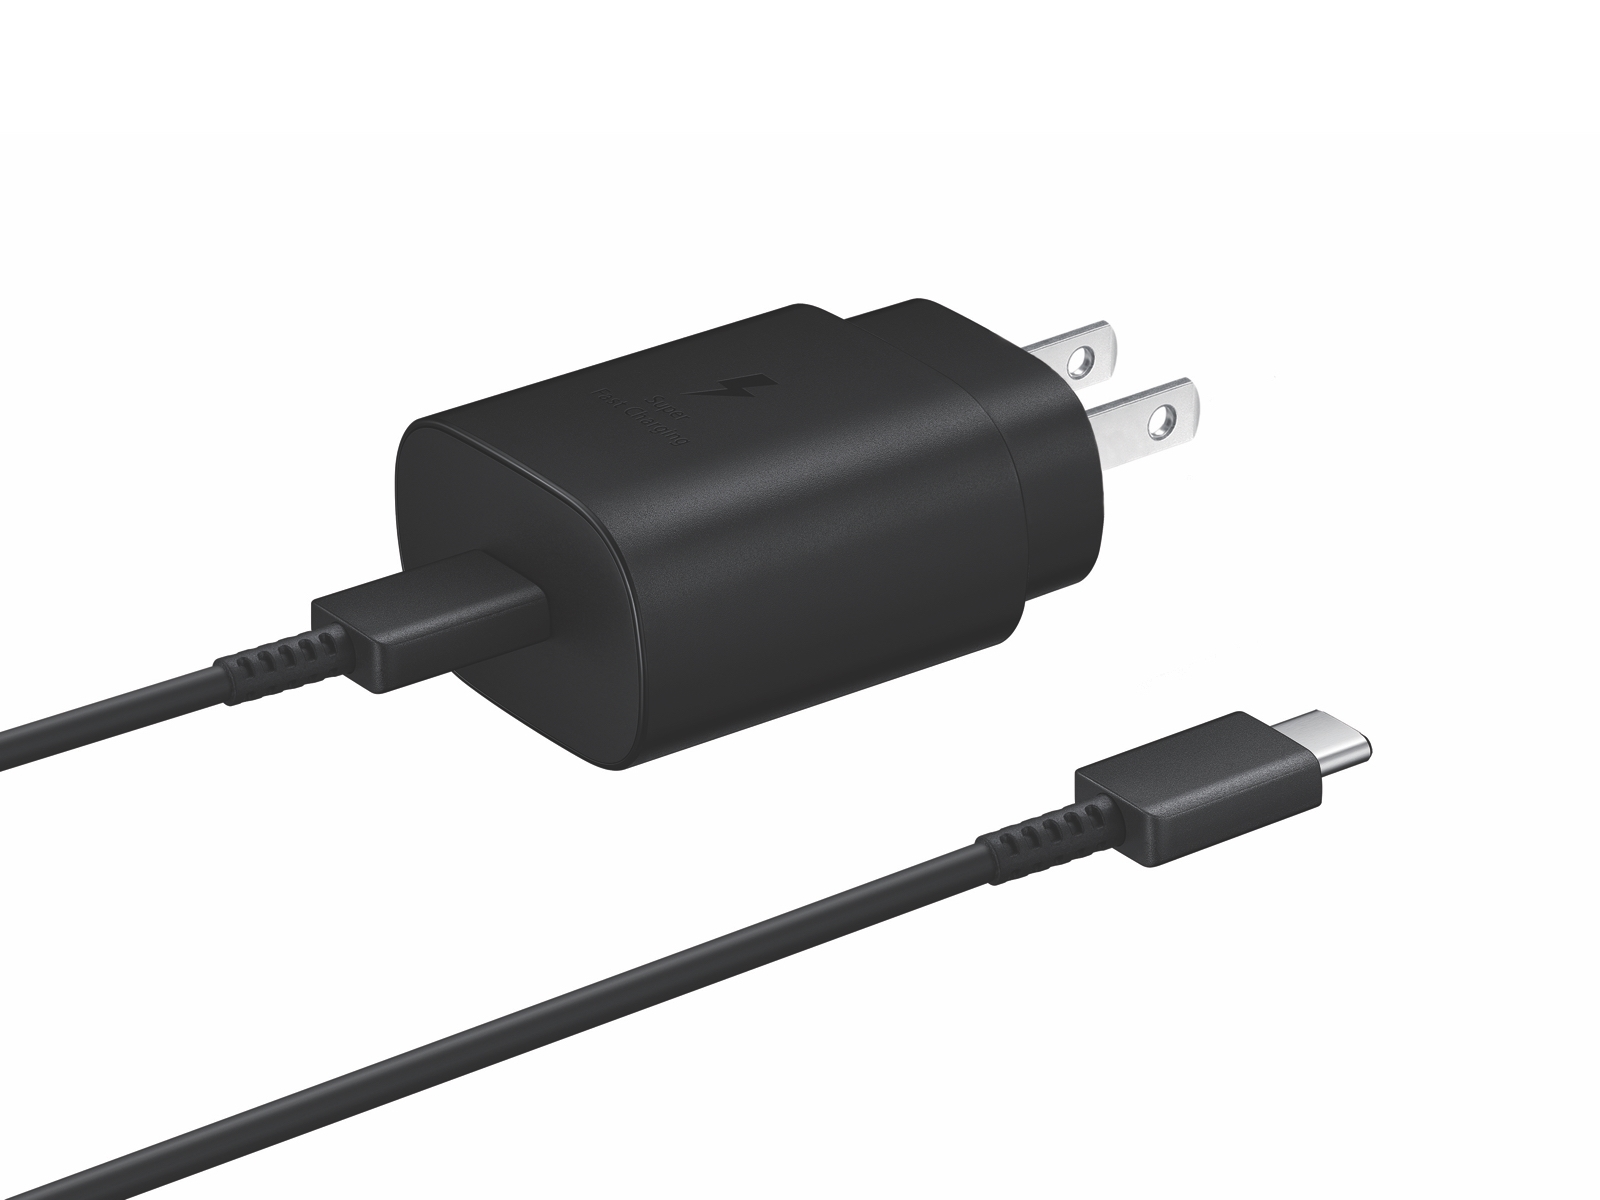 25W USB-C Fast Charging Charger, Black Mobile Accessories - EP-TA800XBEGUS | Samsung US